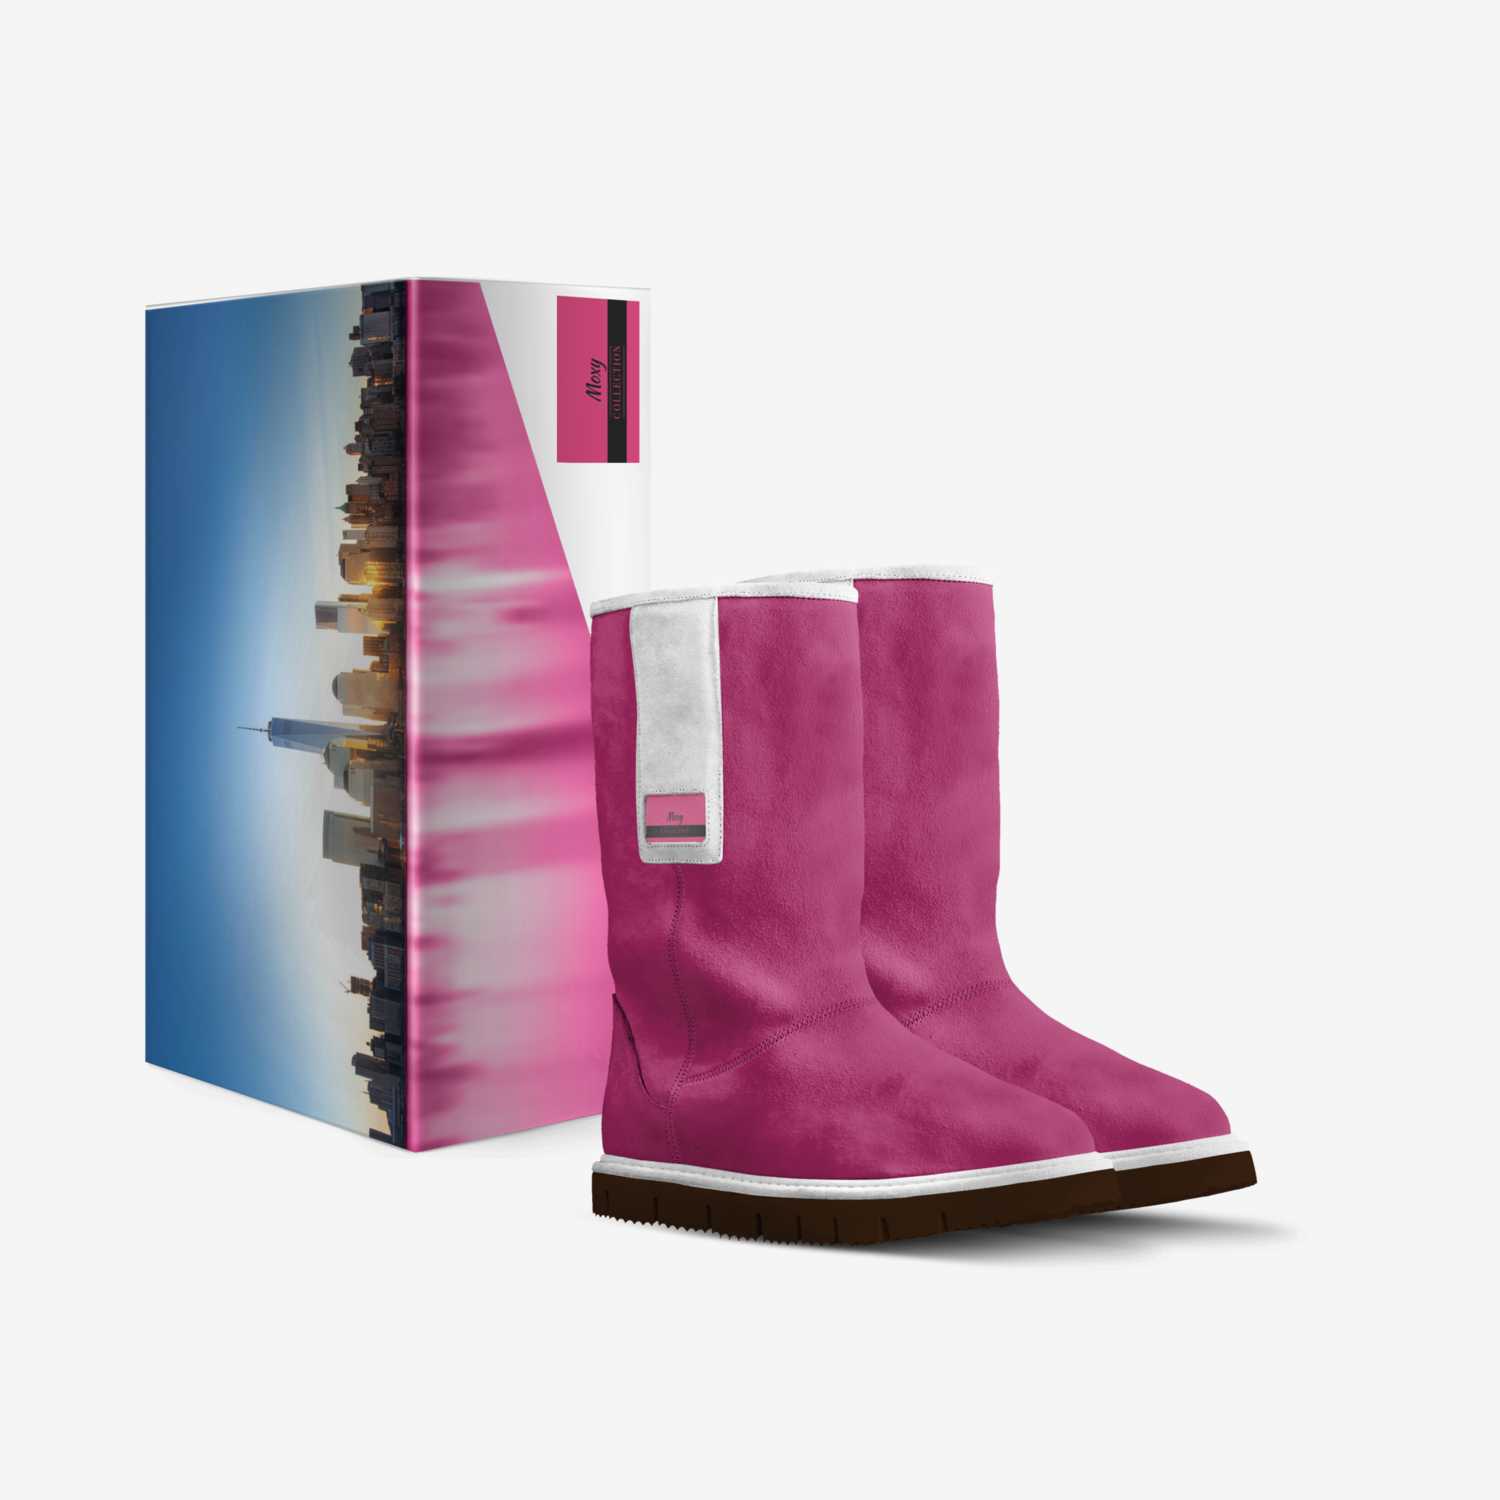 Moxy Uggs custom made in Italy shoes by Daniel Rucker | Box view